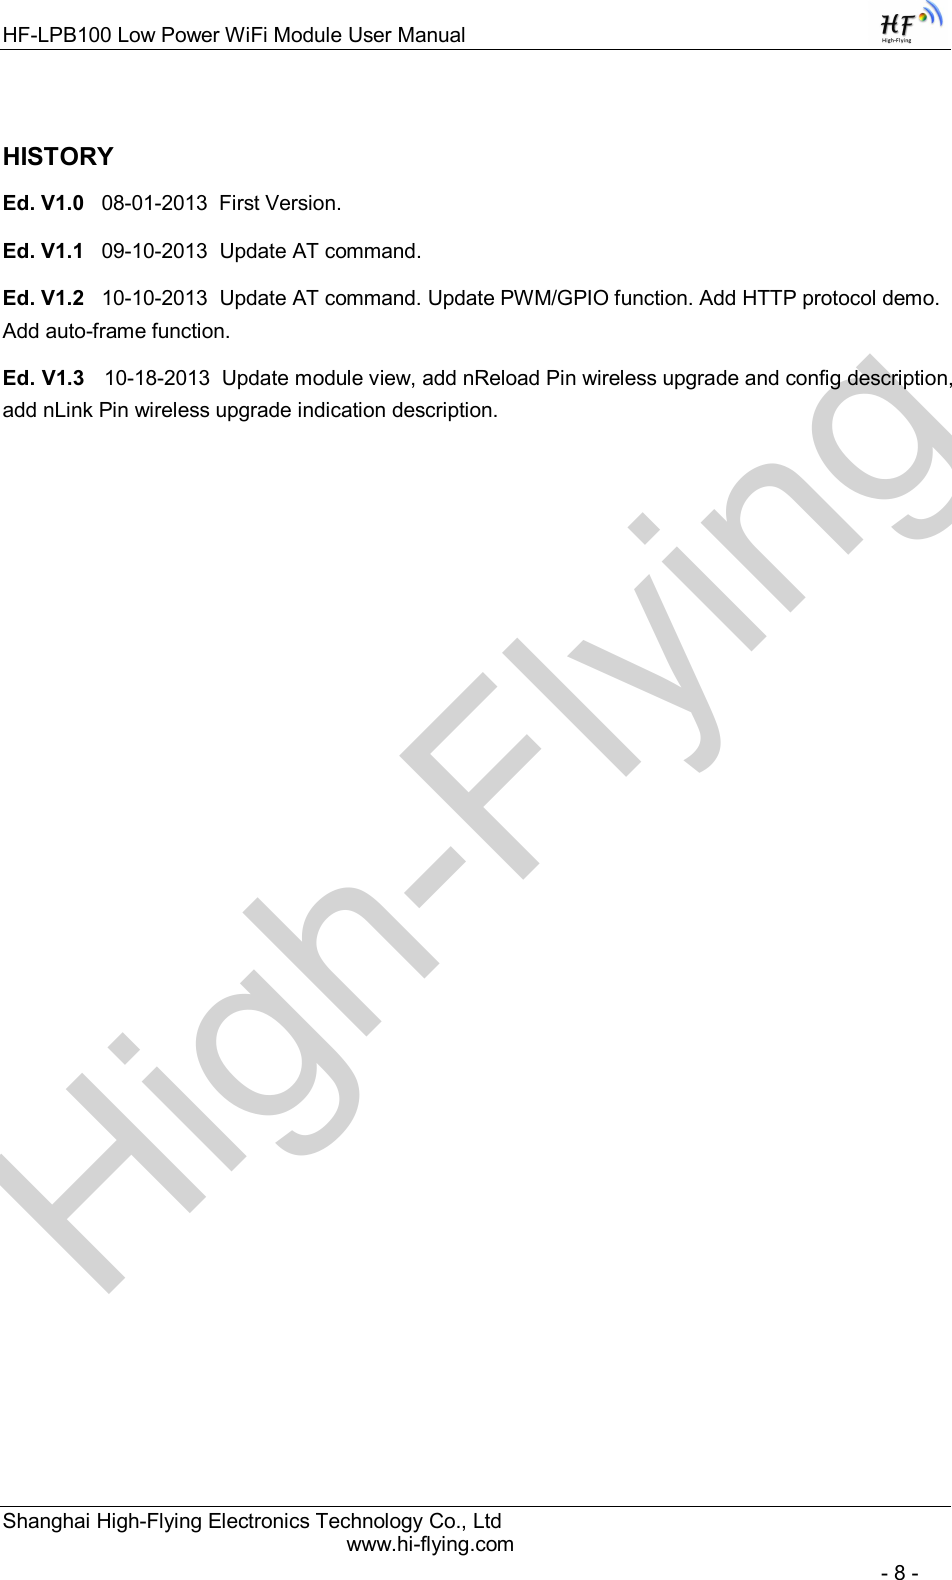 High-FlyingHF-LPB100 Low Power WiFi Module User Manual Shanghai High-Flying Electronics Technology Co., Ltd www.hi-flying.com   - 8 - HISTORY Ed. V1.0   08-01-2013  First Version. Ed. V1.1   09-10-2013  Update AT command. Ed. V1.2   10-10-2013  Update AT command. Update PWM/GPIO function. Add HTTP protocol demo. Add auto-frame function. Ed. V1.3   10-18-2013  Update module view, add nReload Pin wireless upgrade and config description, add nLink Pin wireless upgrade indication description.            